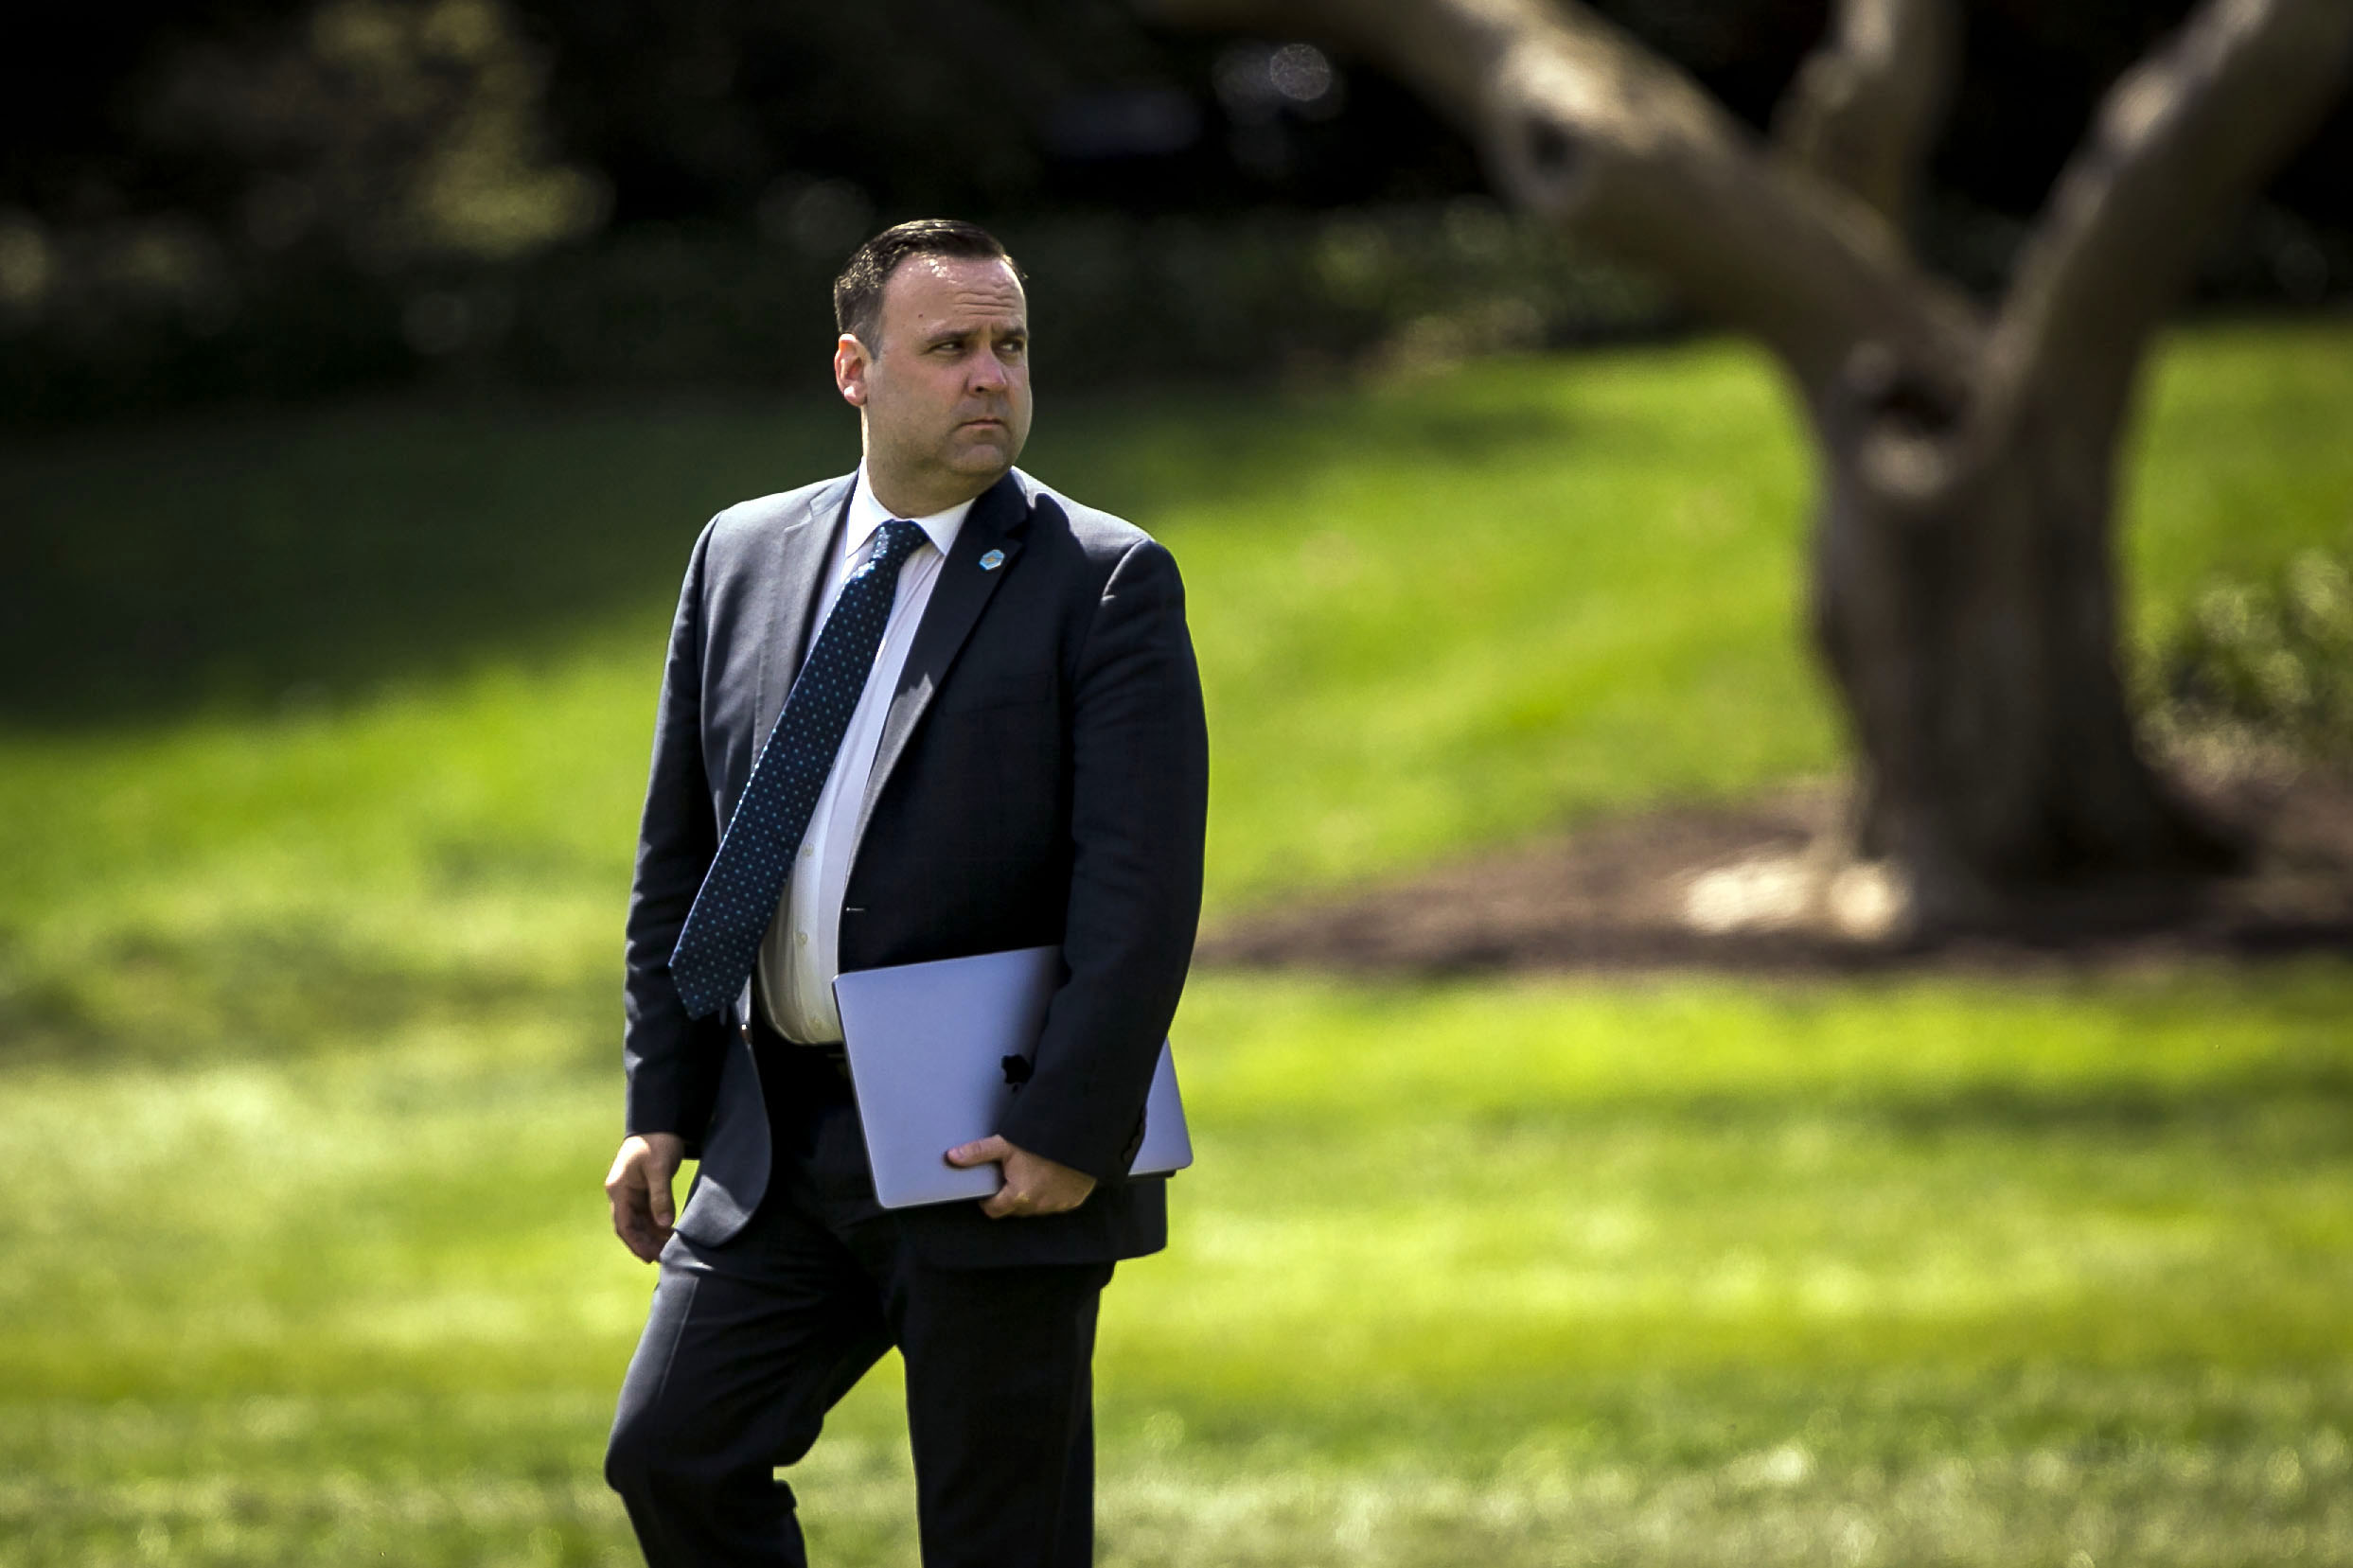 PHOTO: Dan Scavino Jr., White House director of social media, walks on the South Lawn of the White House before boarding Marine One in Washington, on April 5, 2018.